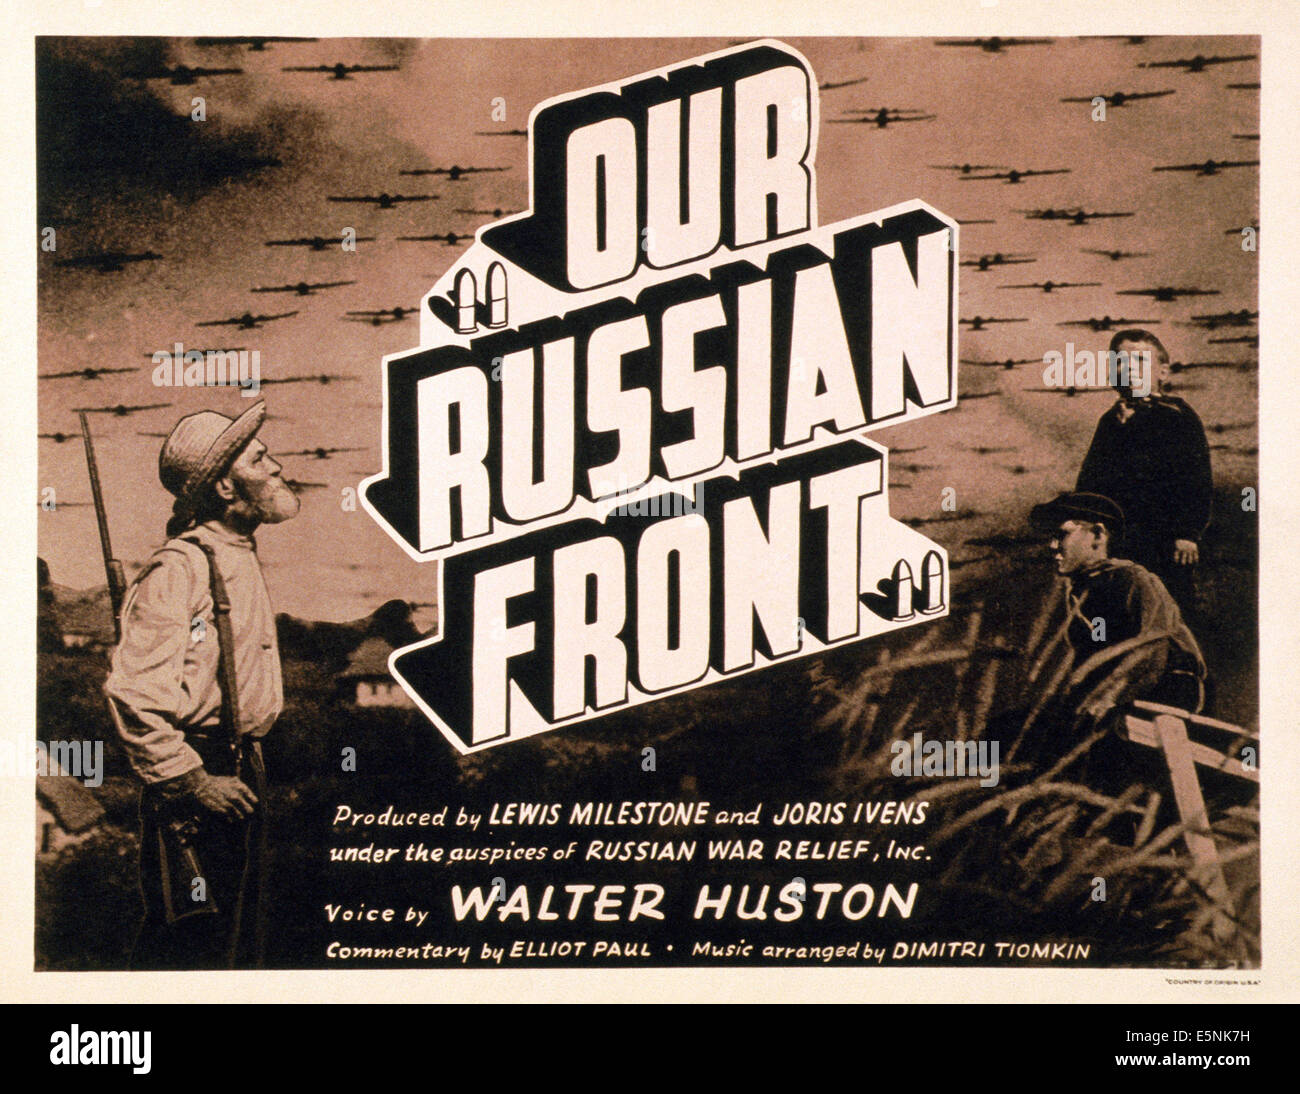 Unsere russische FRONT, US Lobbycard, 1942 Stockfoto